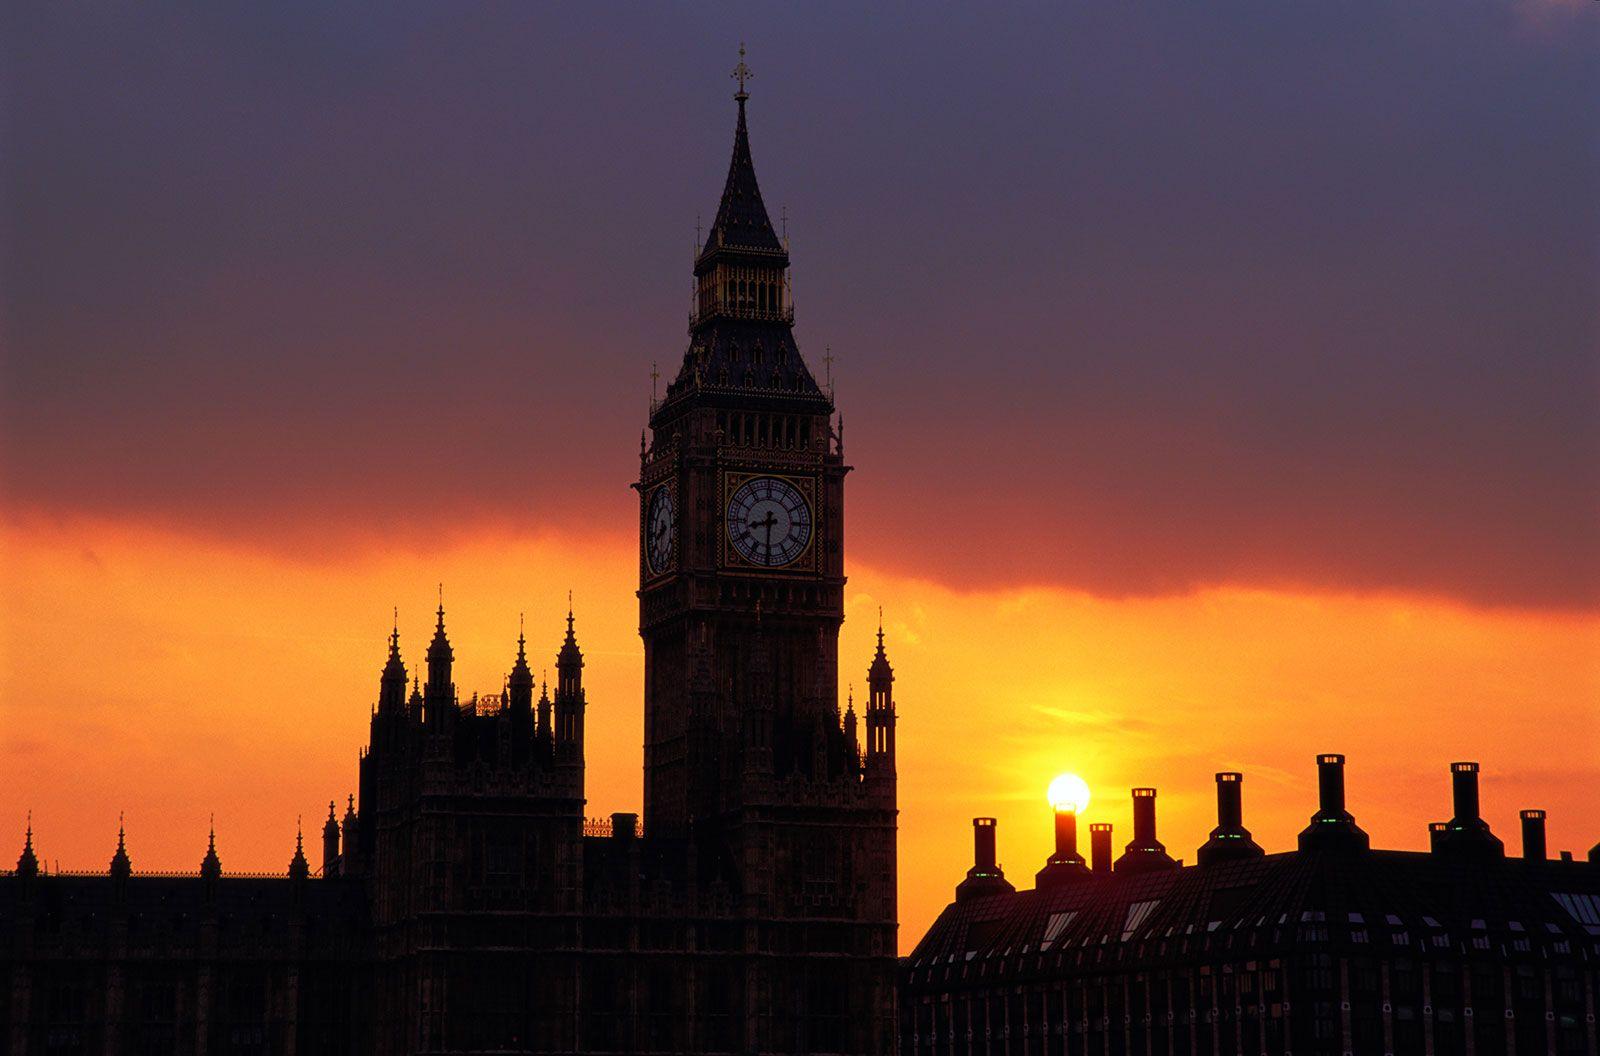 Tips for Making the Most of Your London Trip with a Visa